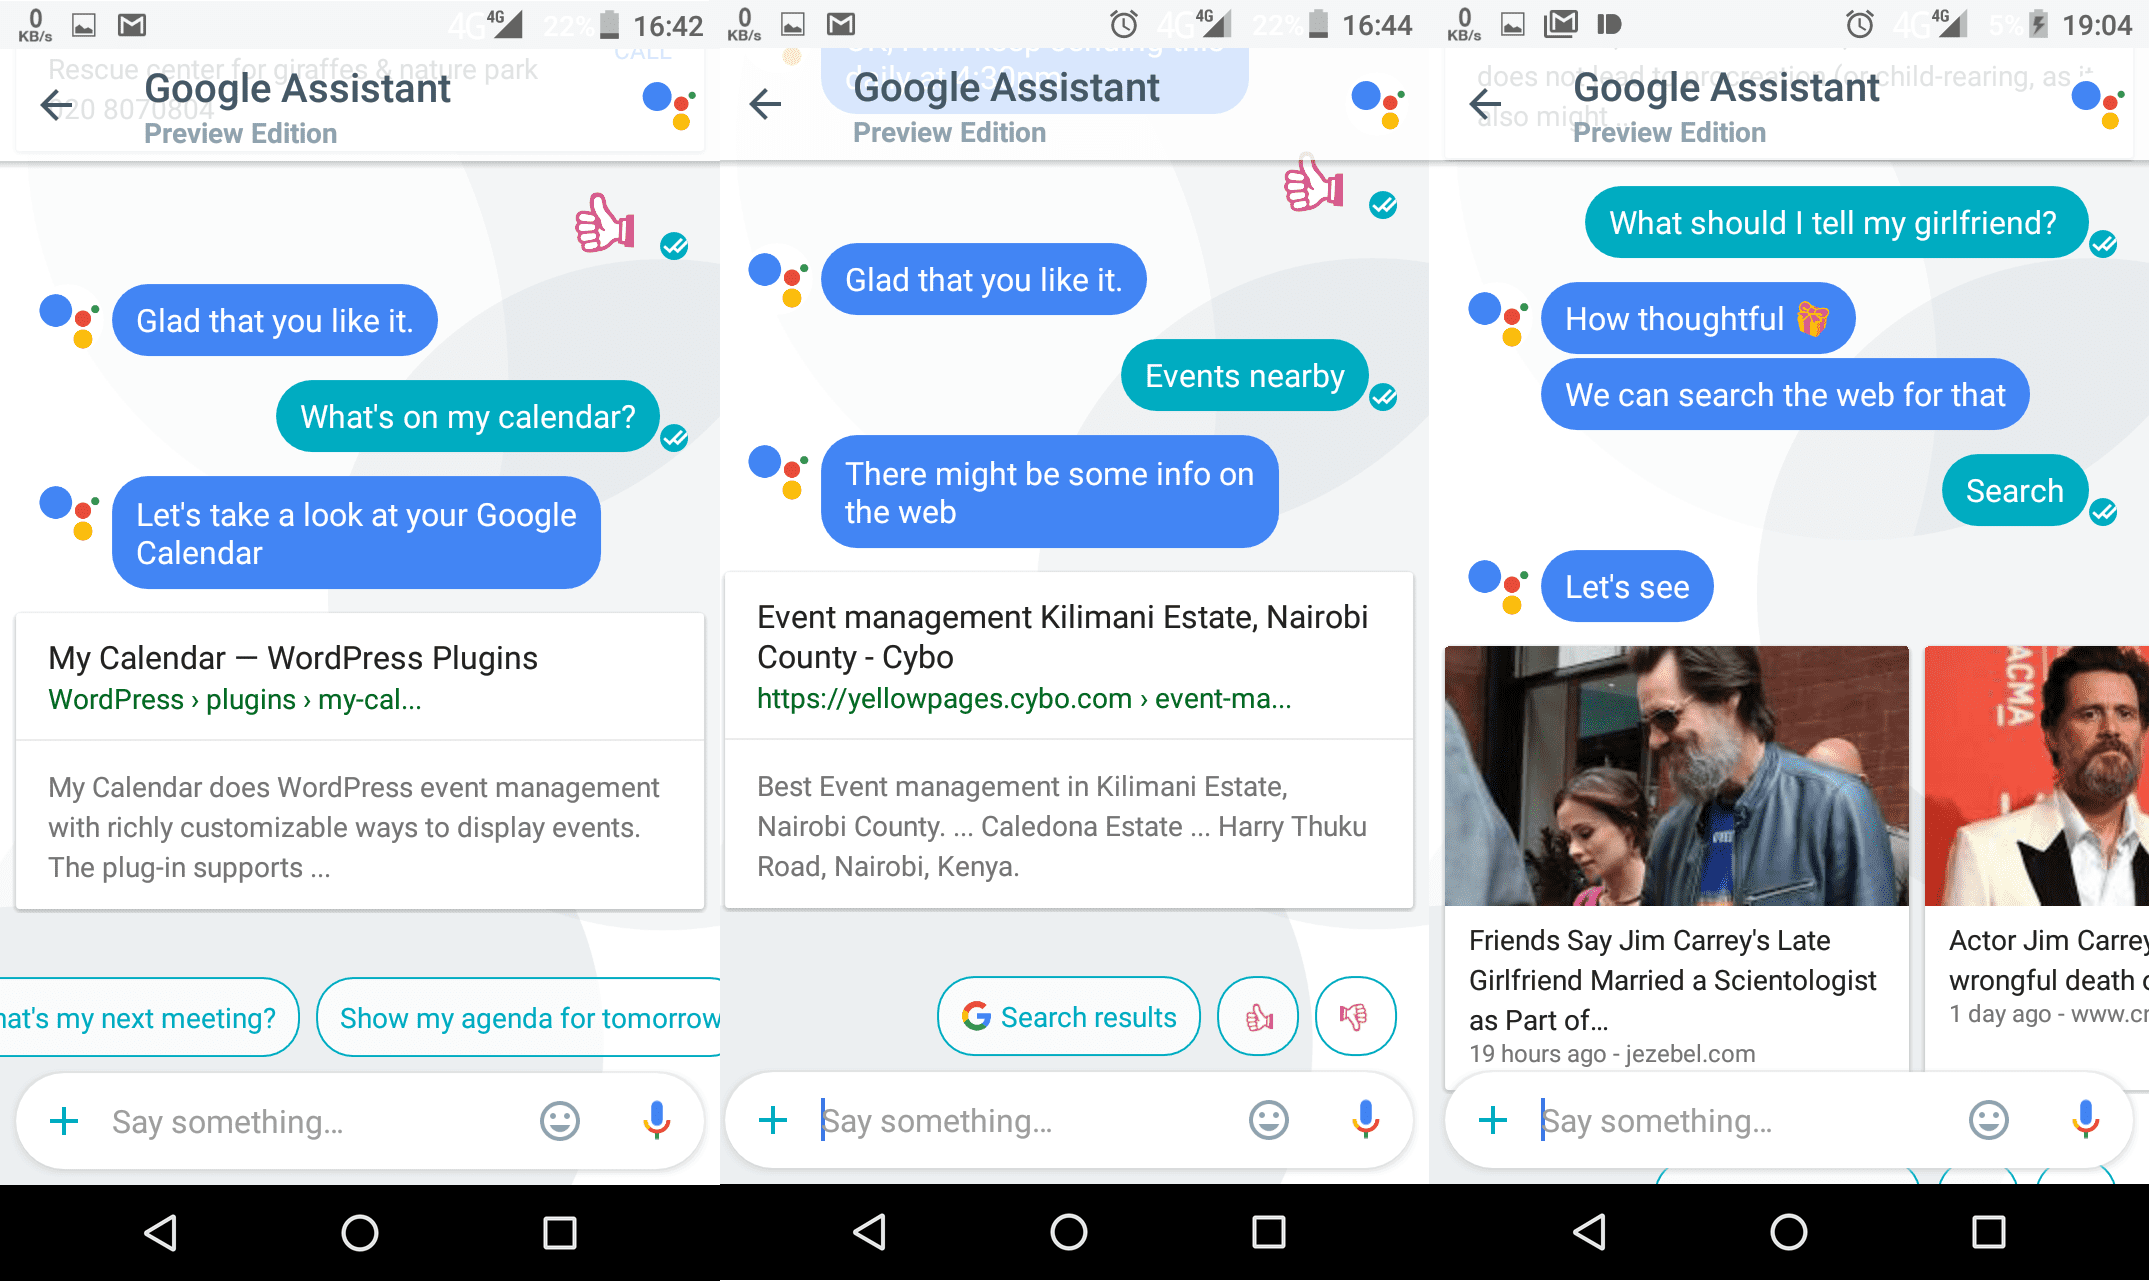 Allo does get some things wrong still, it's not perfect